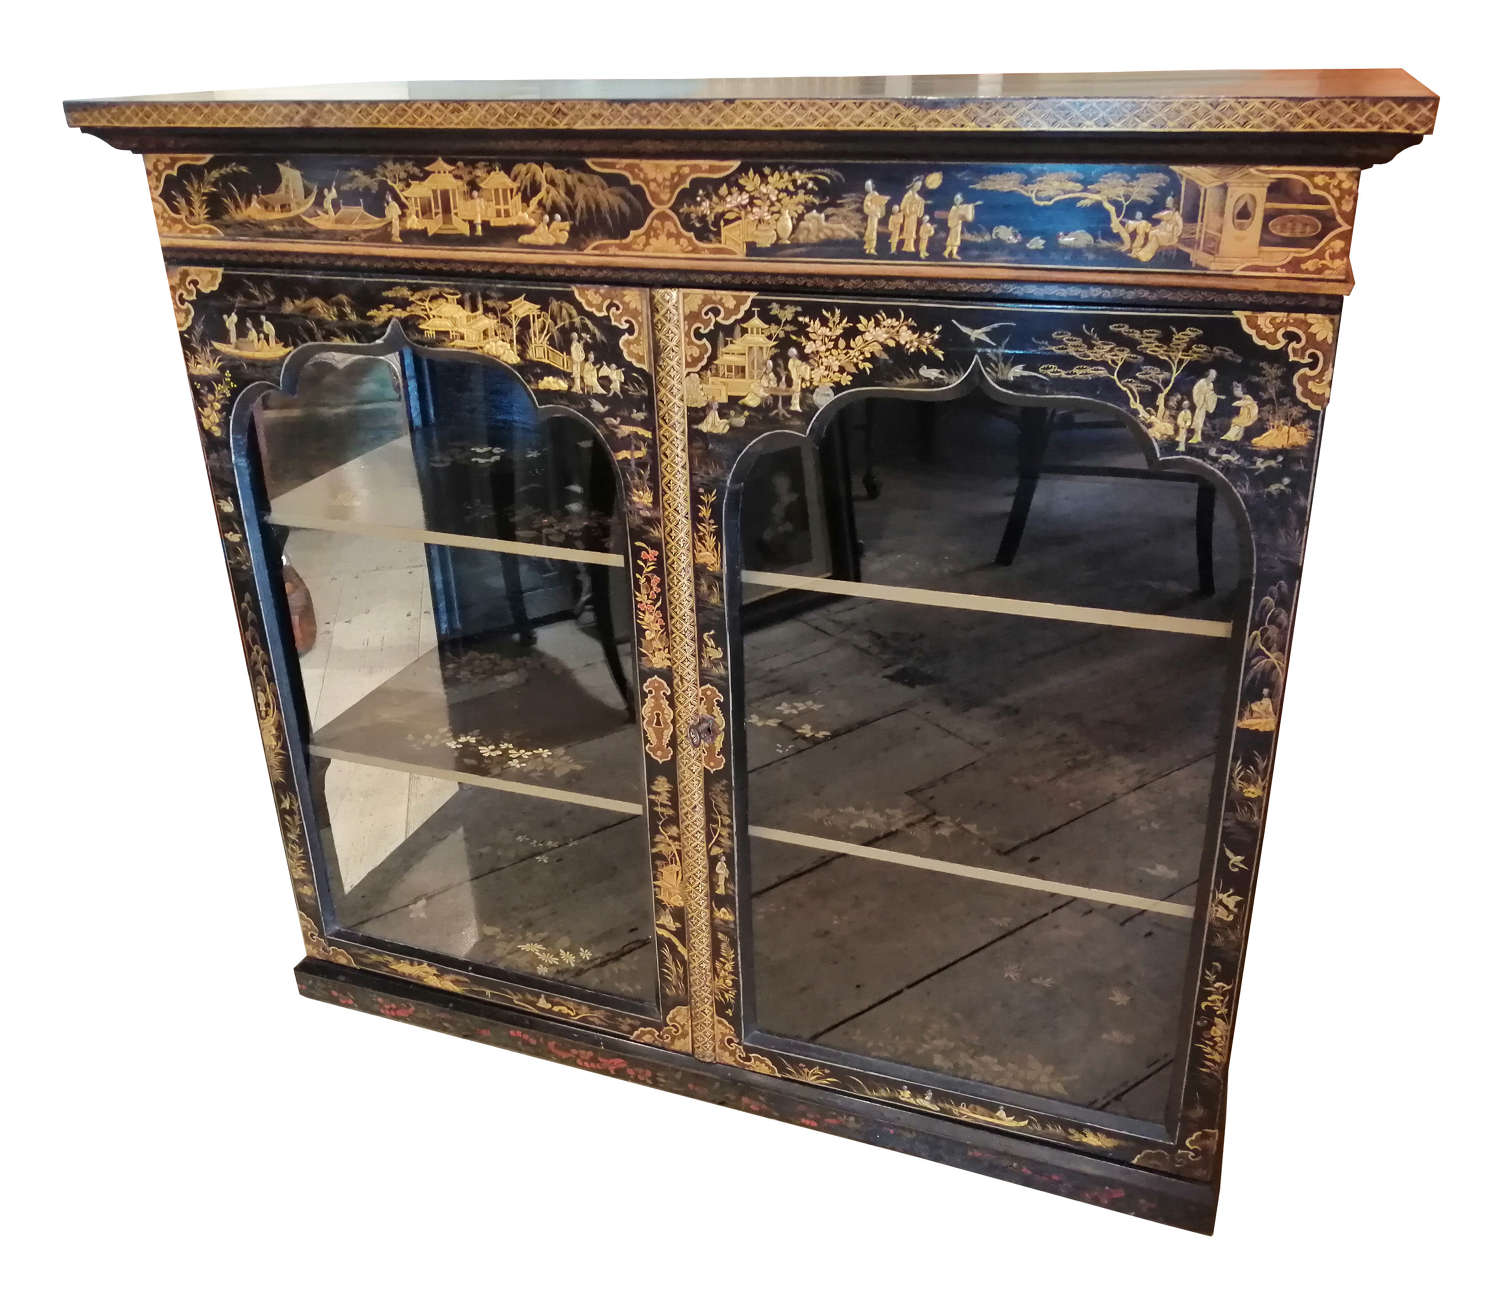 An outstanding 19th century Chinese lacquer display cabinet